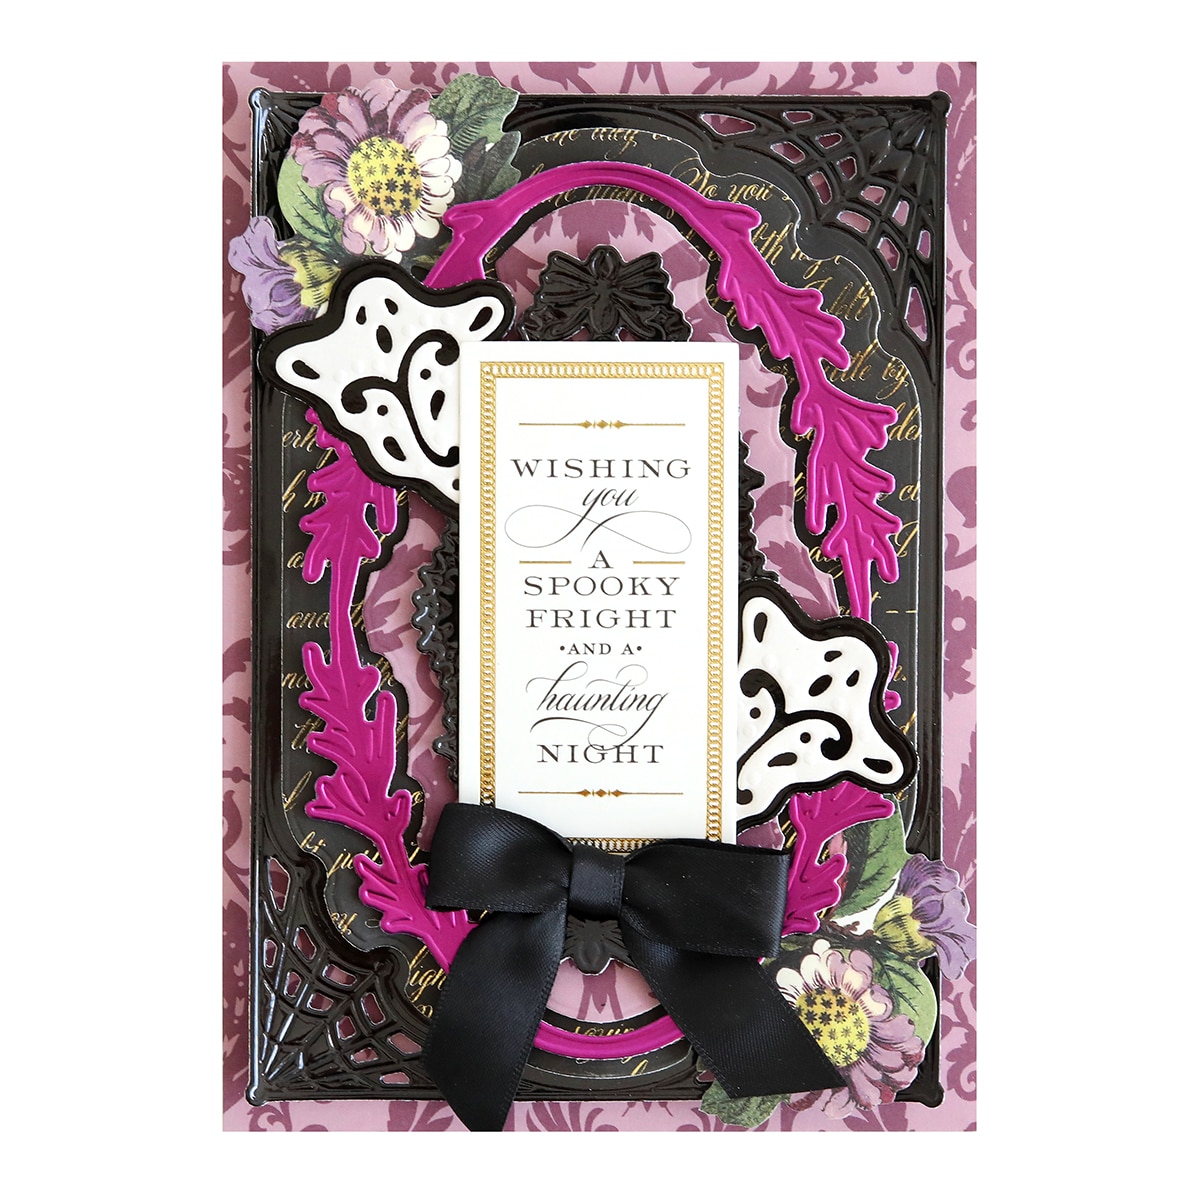 A black and pink card with a bow on it.